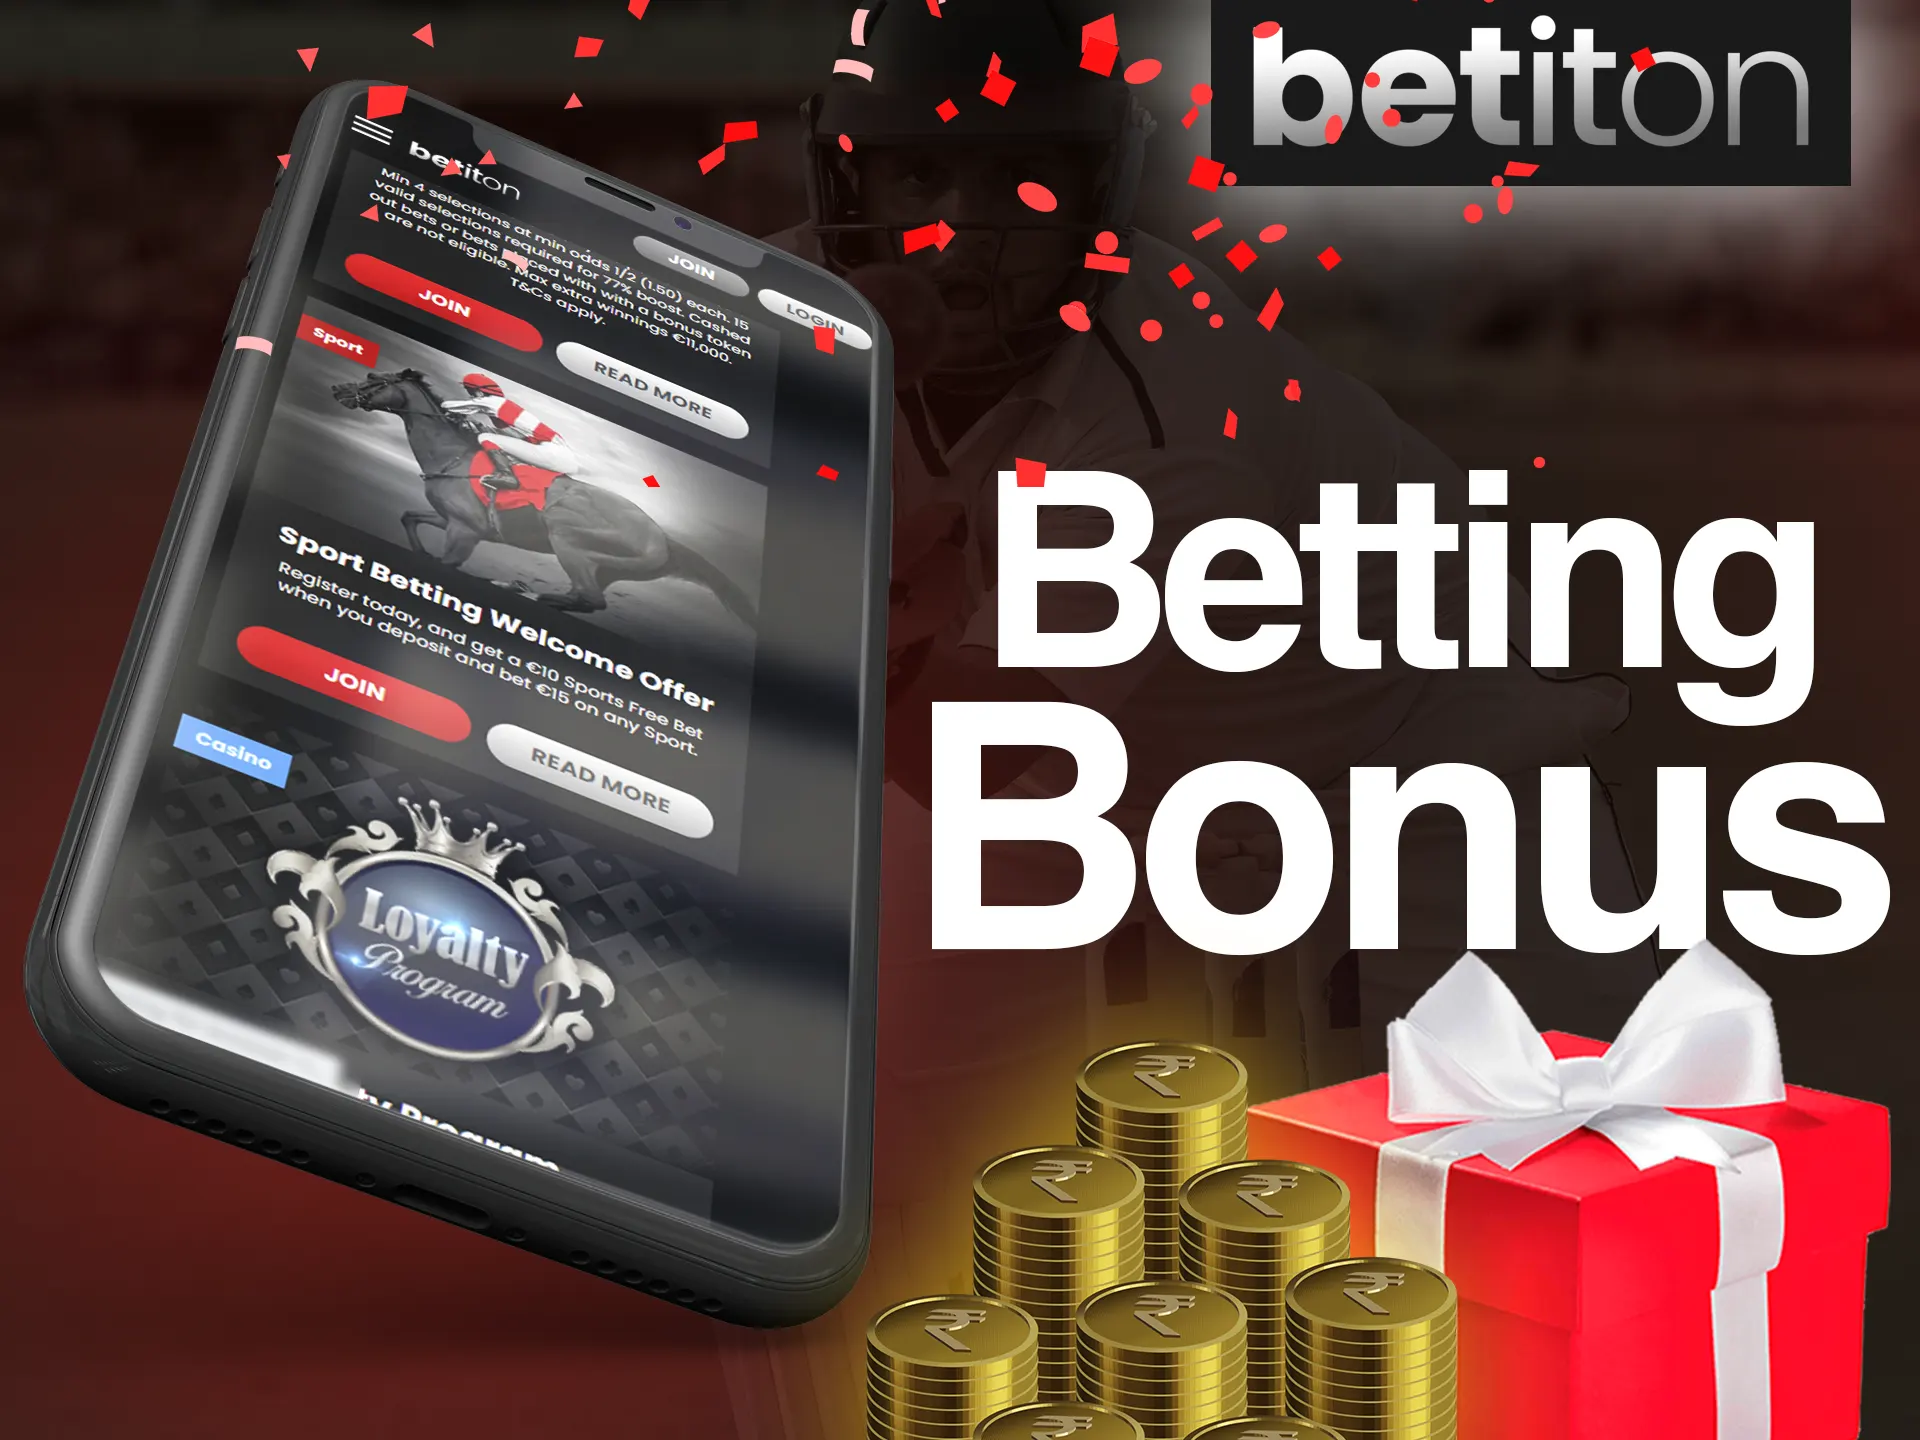 Bet on sports in the app and win a bonus at the Betiton.